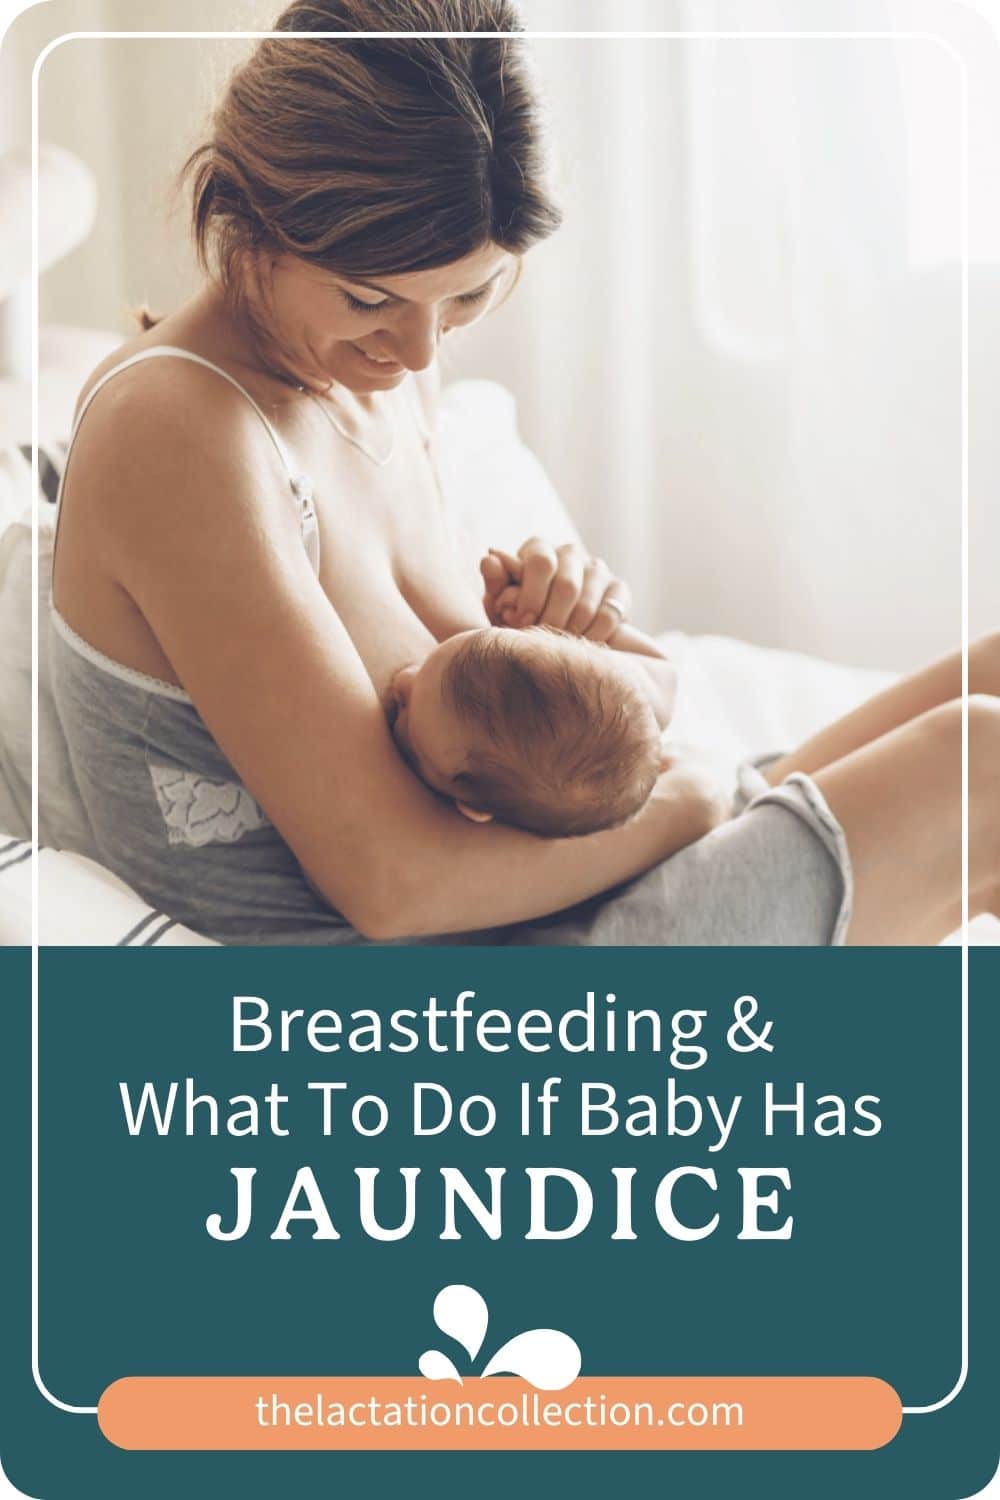 Styled image of a new mom feeding her new baby with the caption: "Breastfeeding & what to do if baby has jaundice"